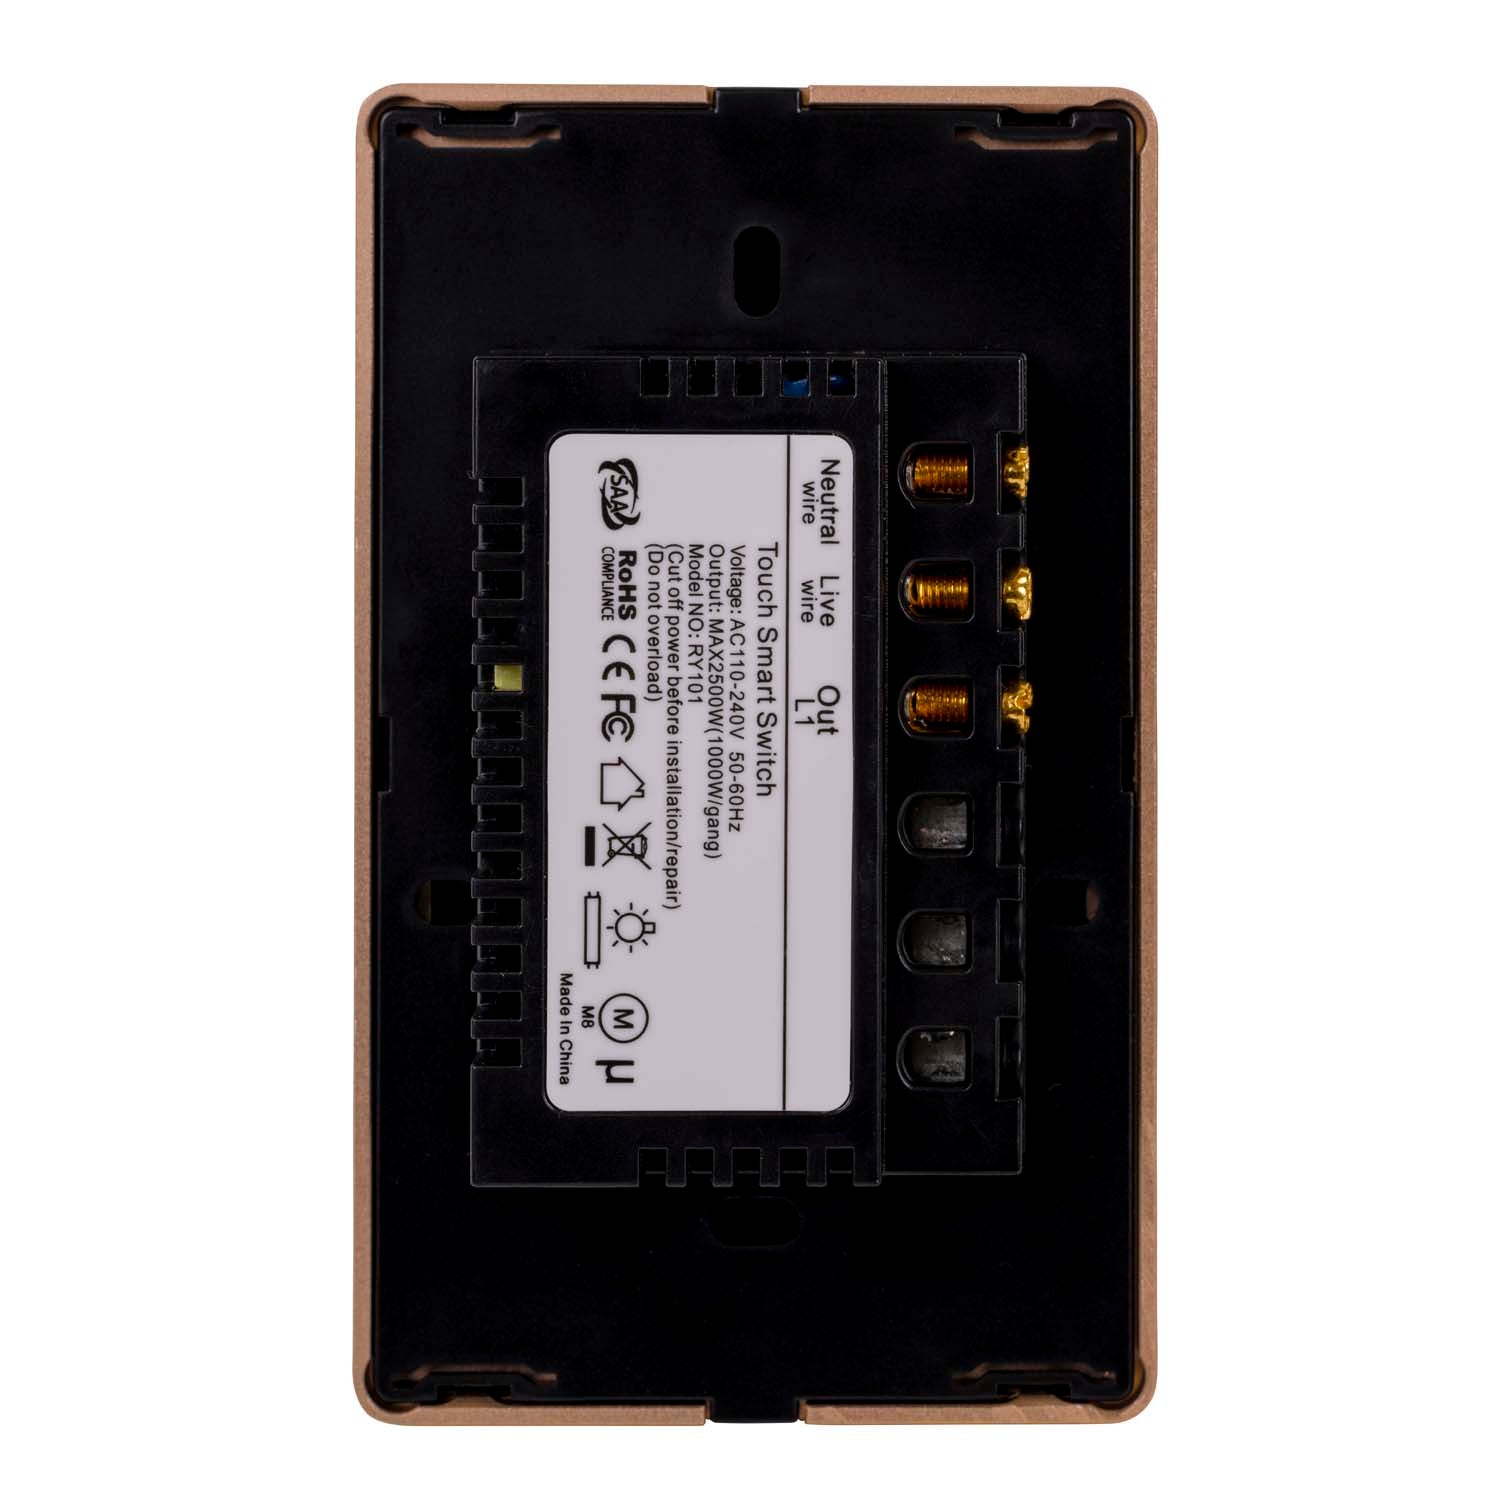 HV9220-1 - Wifi Single Gang Black with Gold Trim Wall Switch